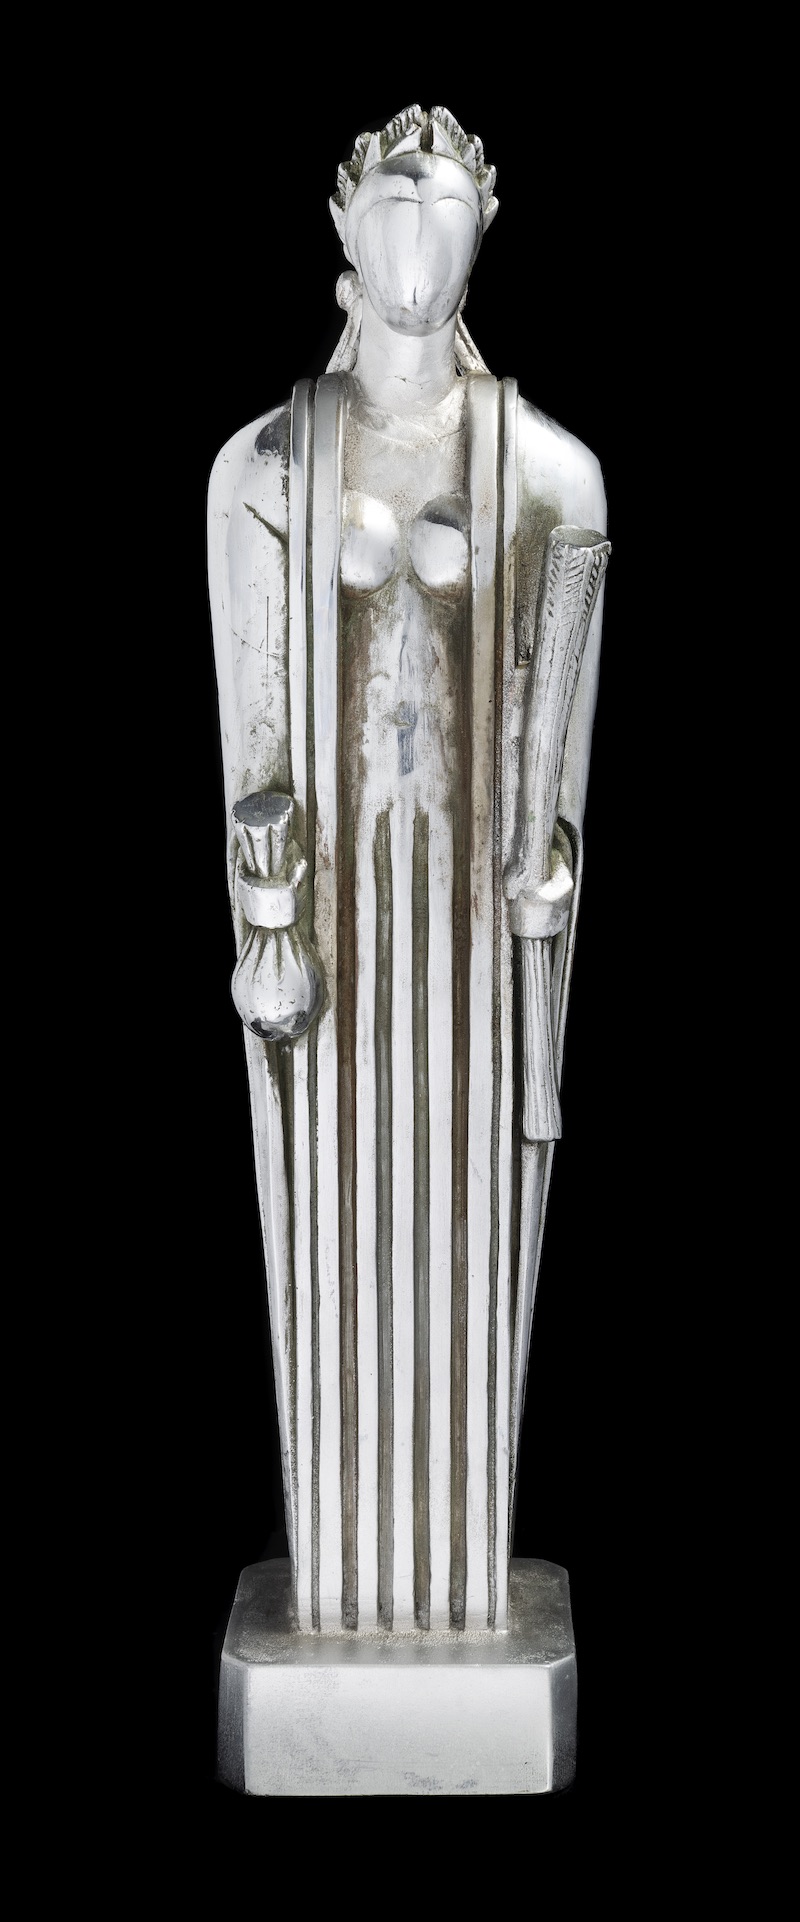 Faceless, silver colored statue of a robed, seemingly bare breasted woman holds a bag in one hand and a rolled object in the other. The upper torso melds vertical lines as the figure descends into parallel vertical lines.